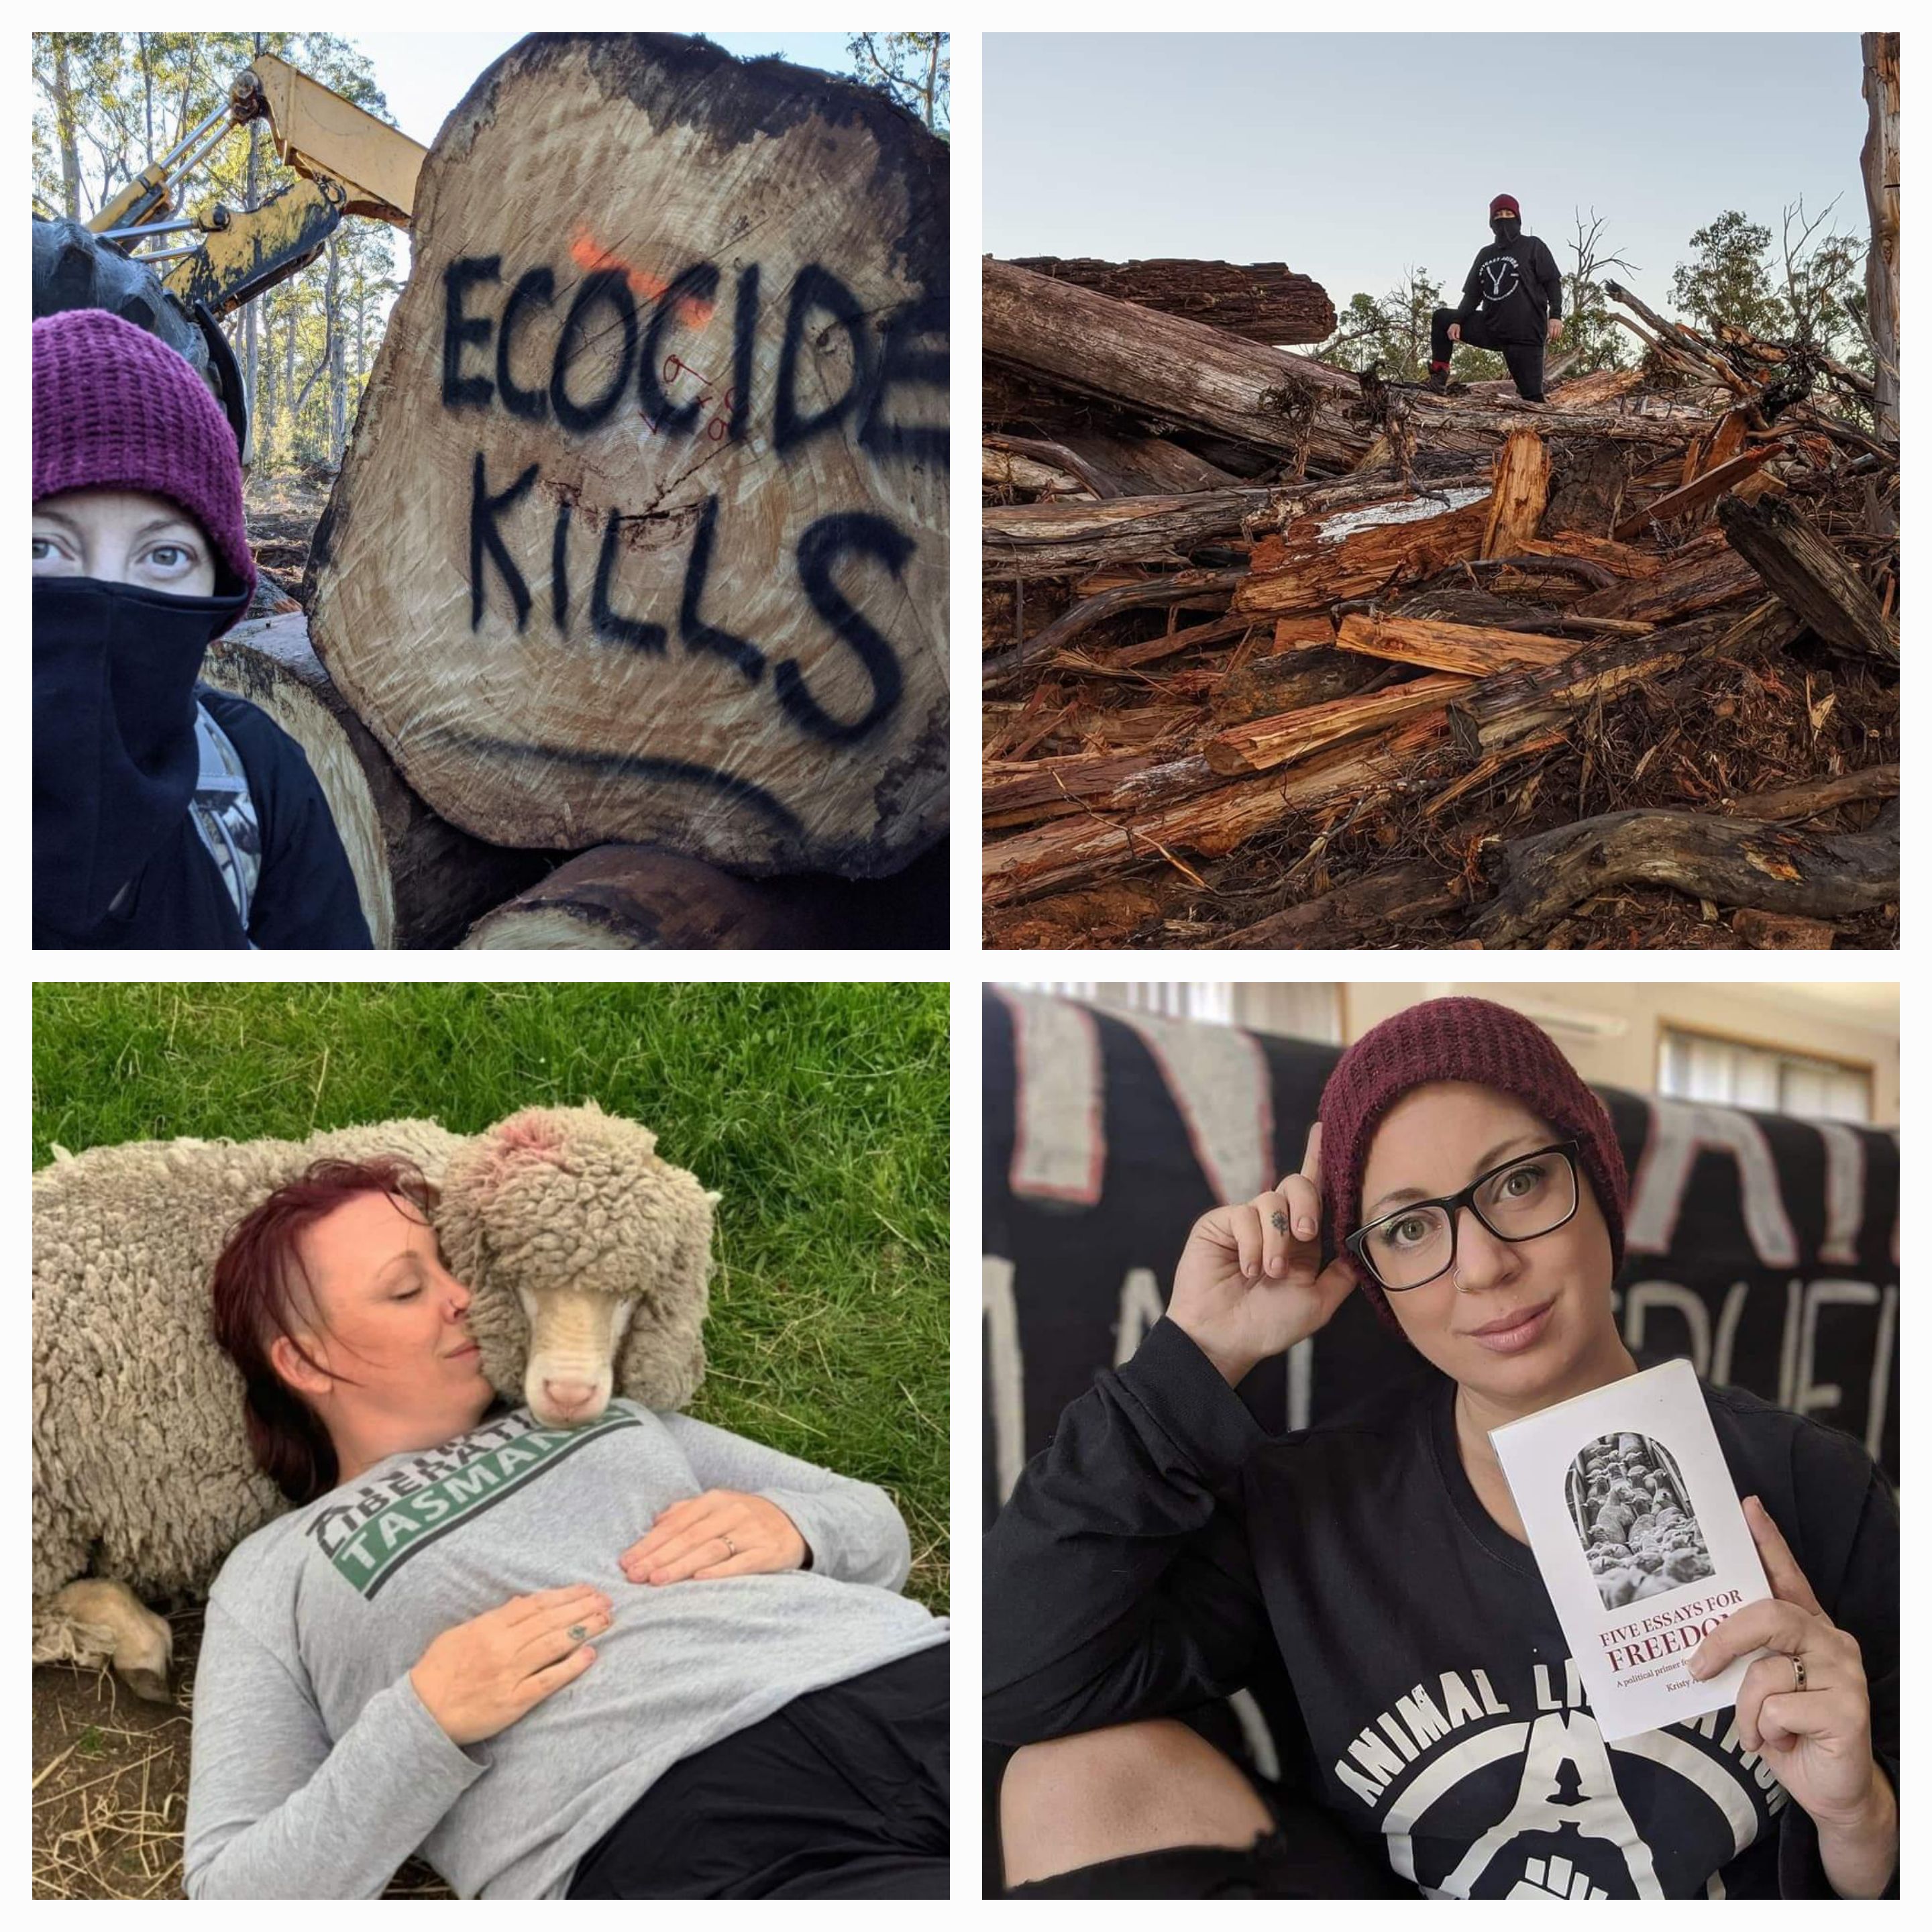 Photos of Kristy Alger at environmental protests, with a sheep and showing her book